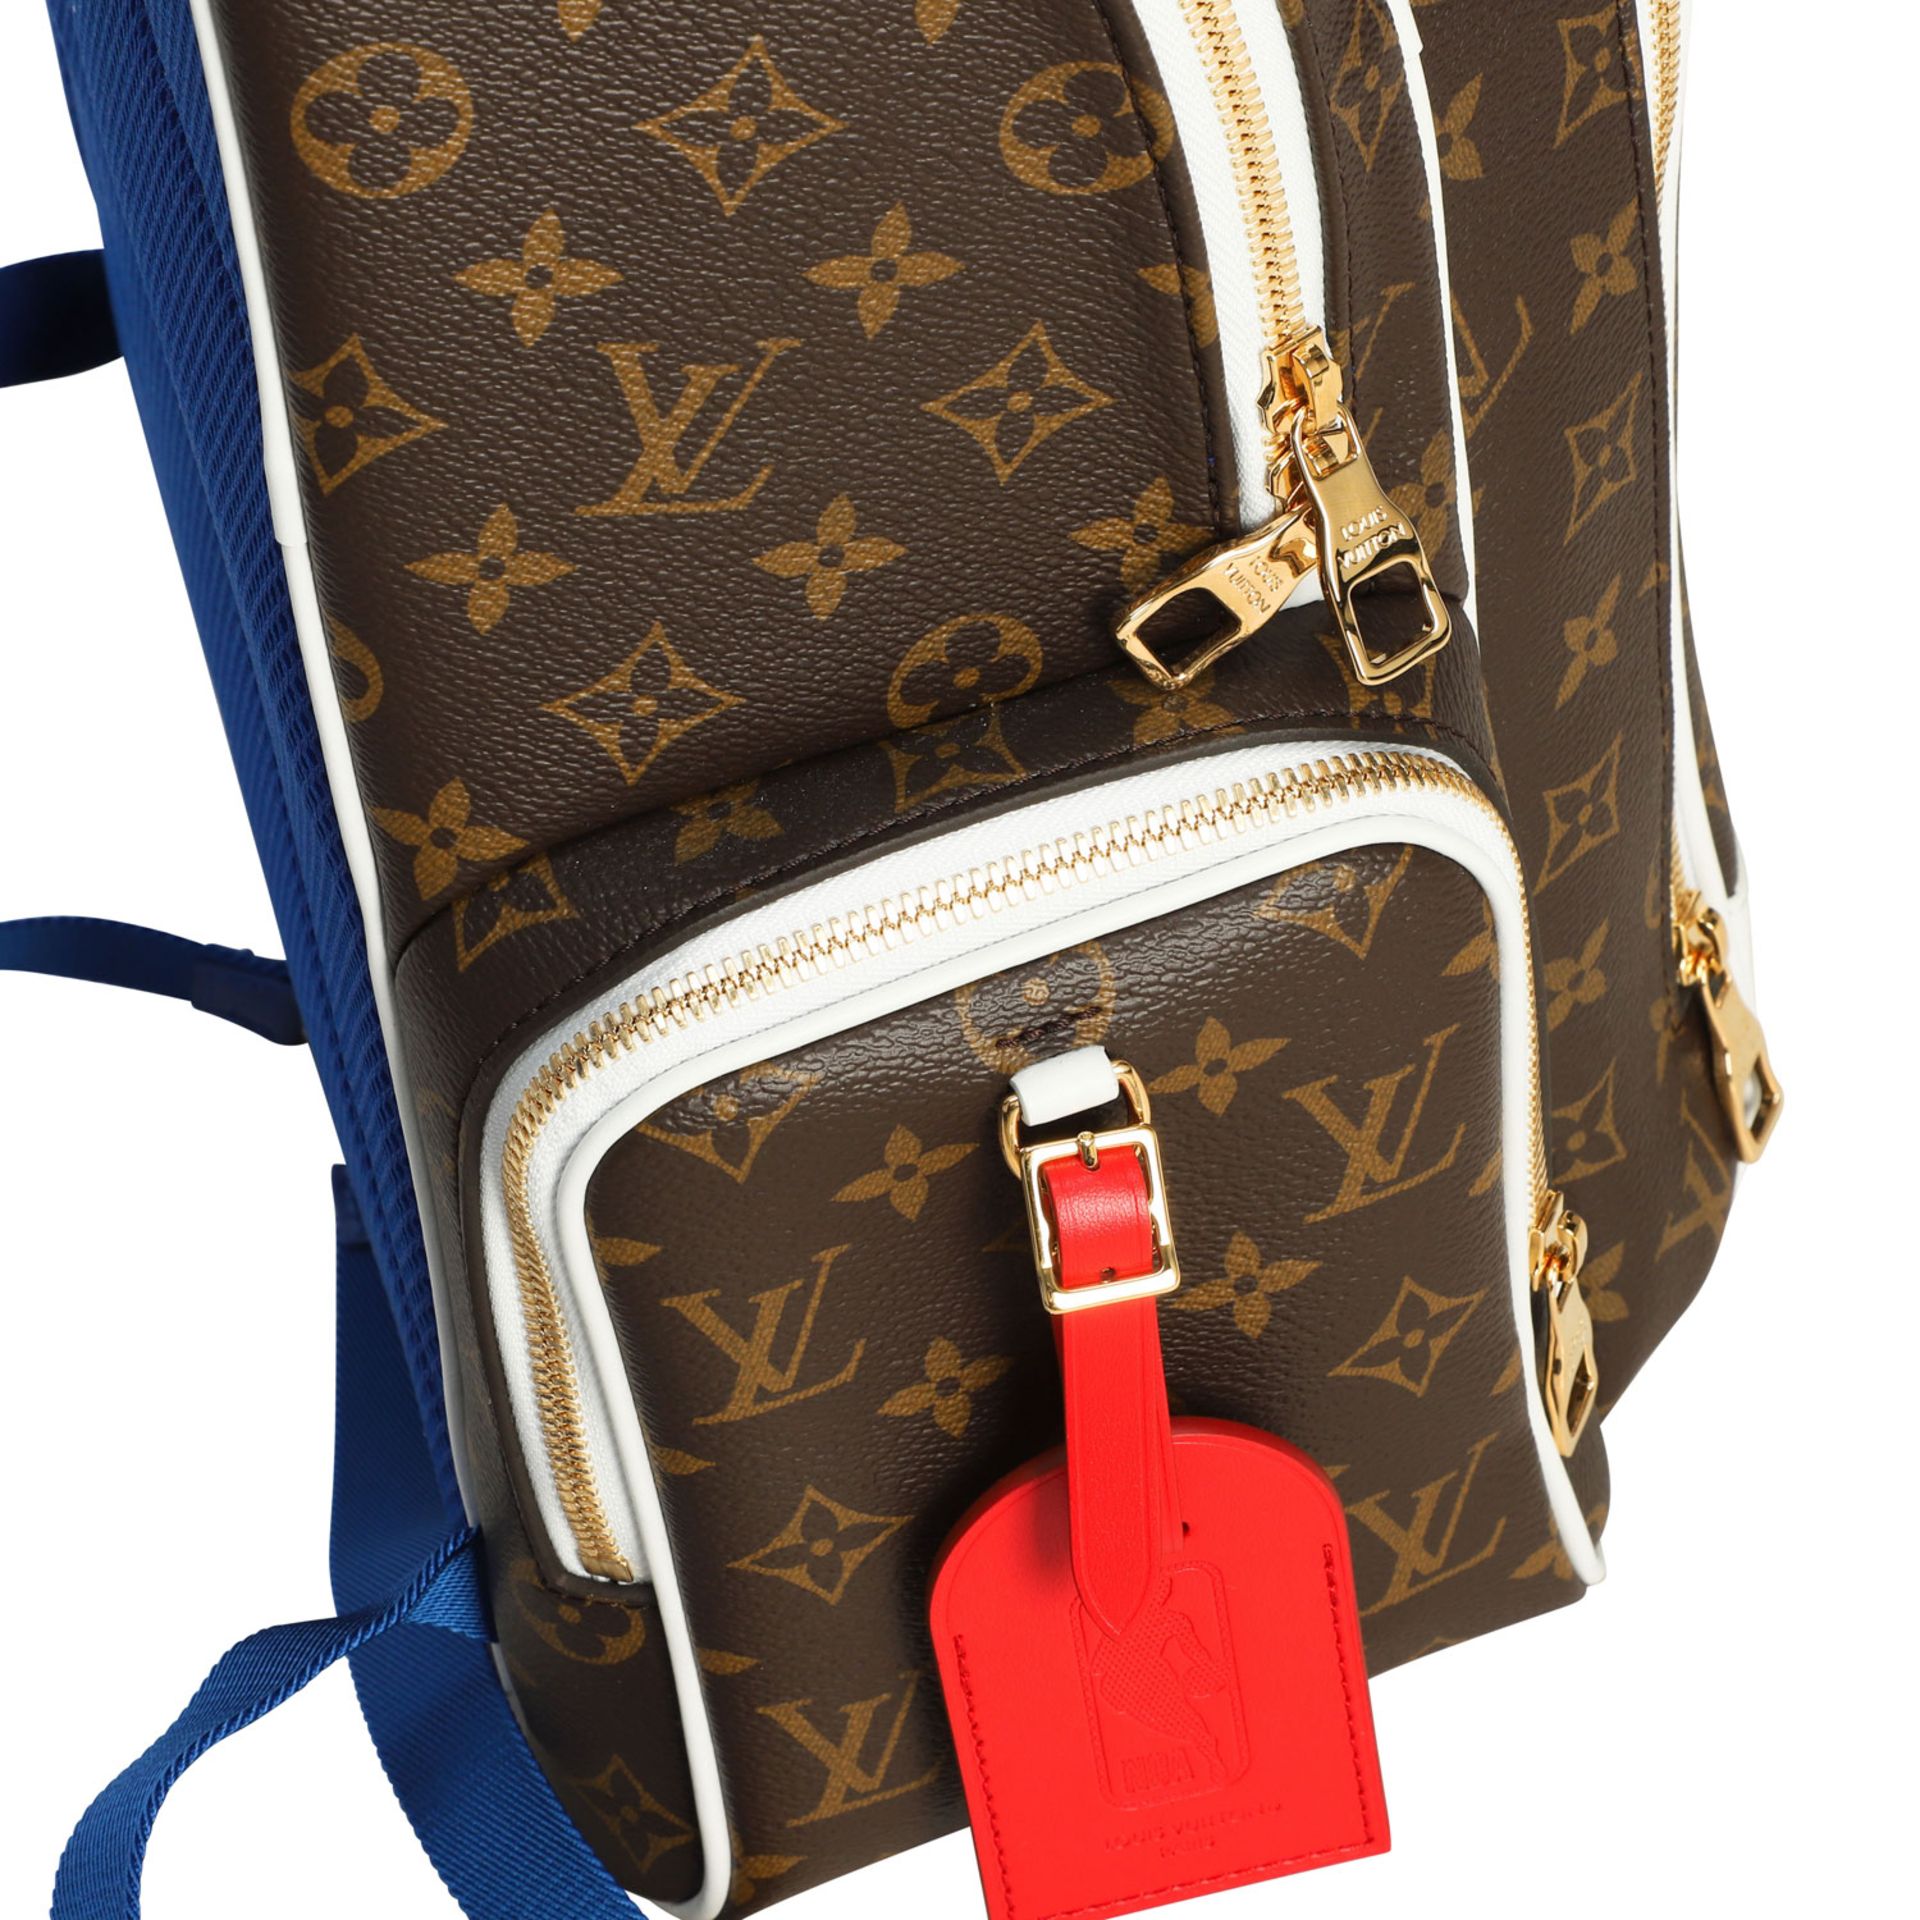 LOUIS VUITTON x NBA Rucksack "NEW BACKPACK". - Image 5 of 8